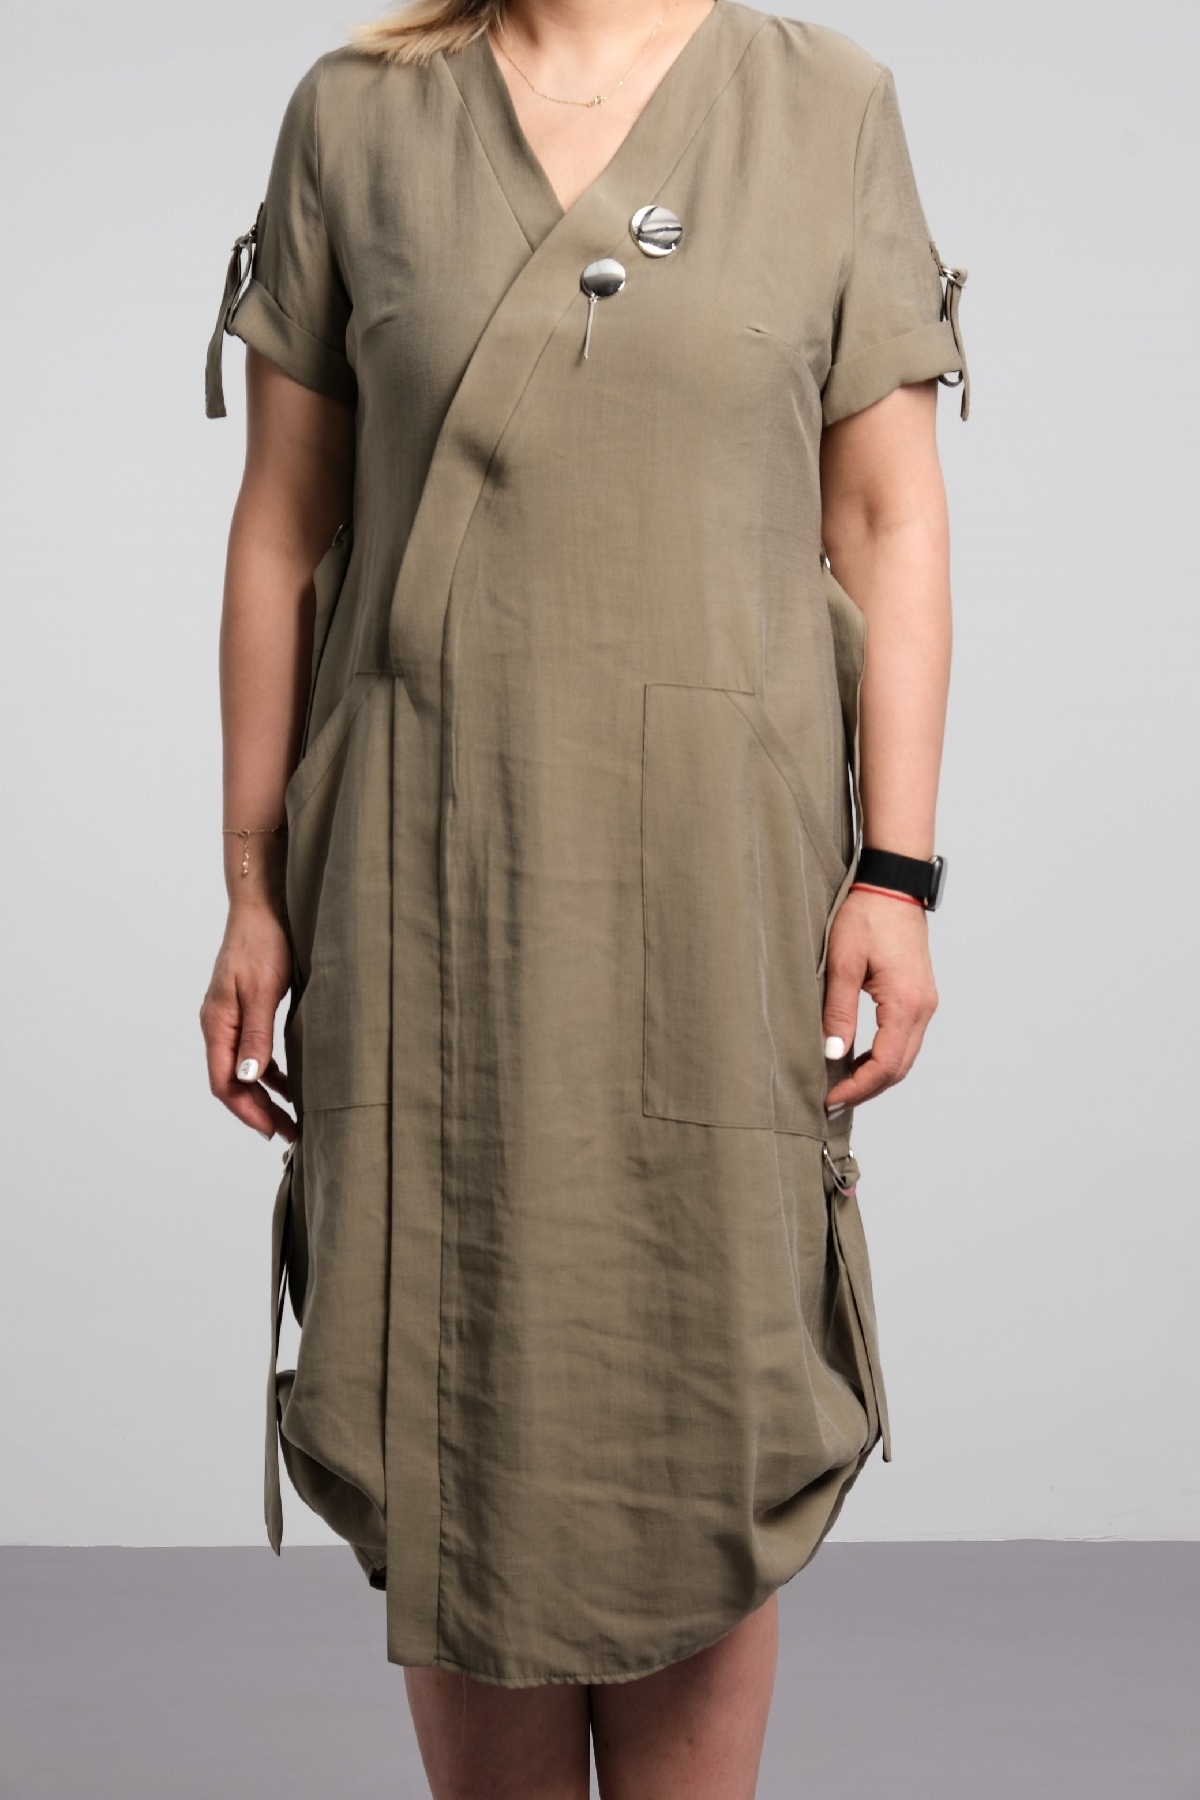 oval cut short sleeve cotton fabric plus size casual dress with lacing accessories